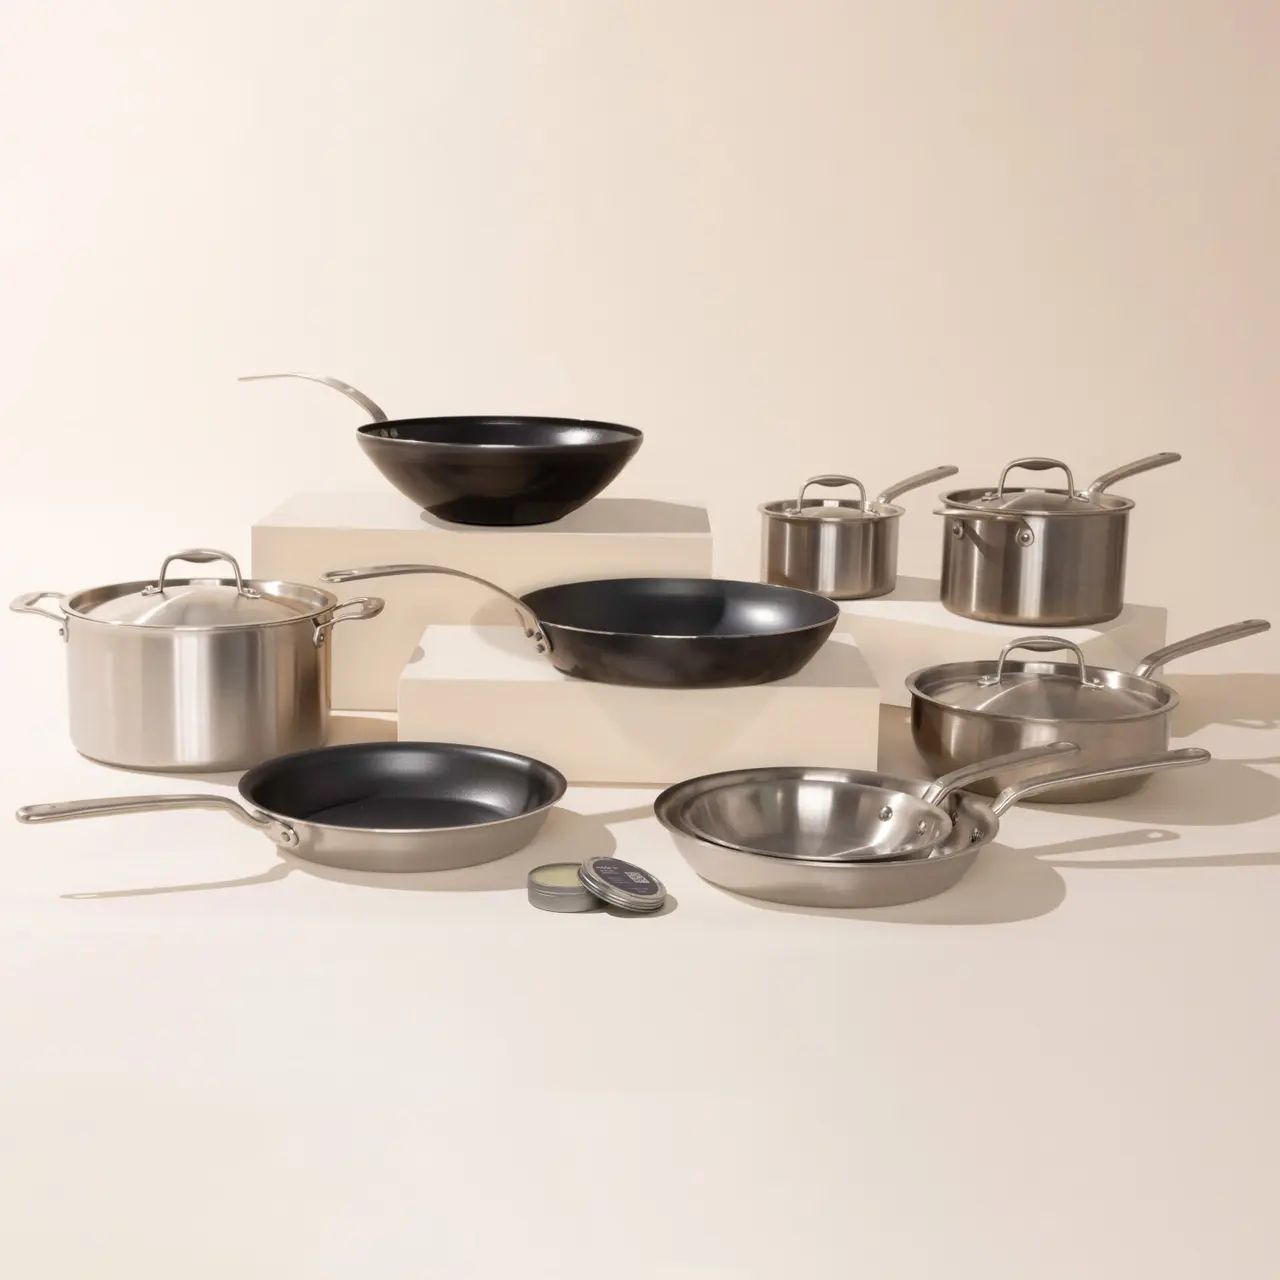 My Favorite Cookware: The Best Pots and Pans - Downshiftology